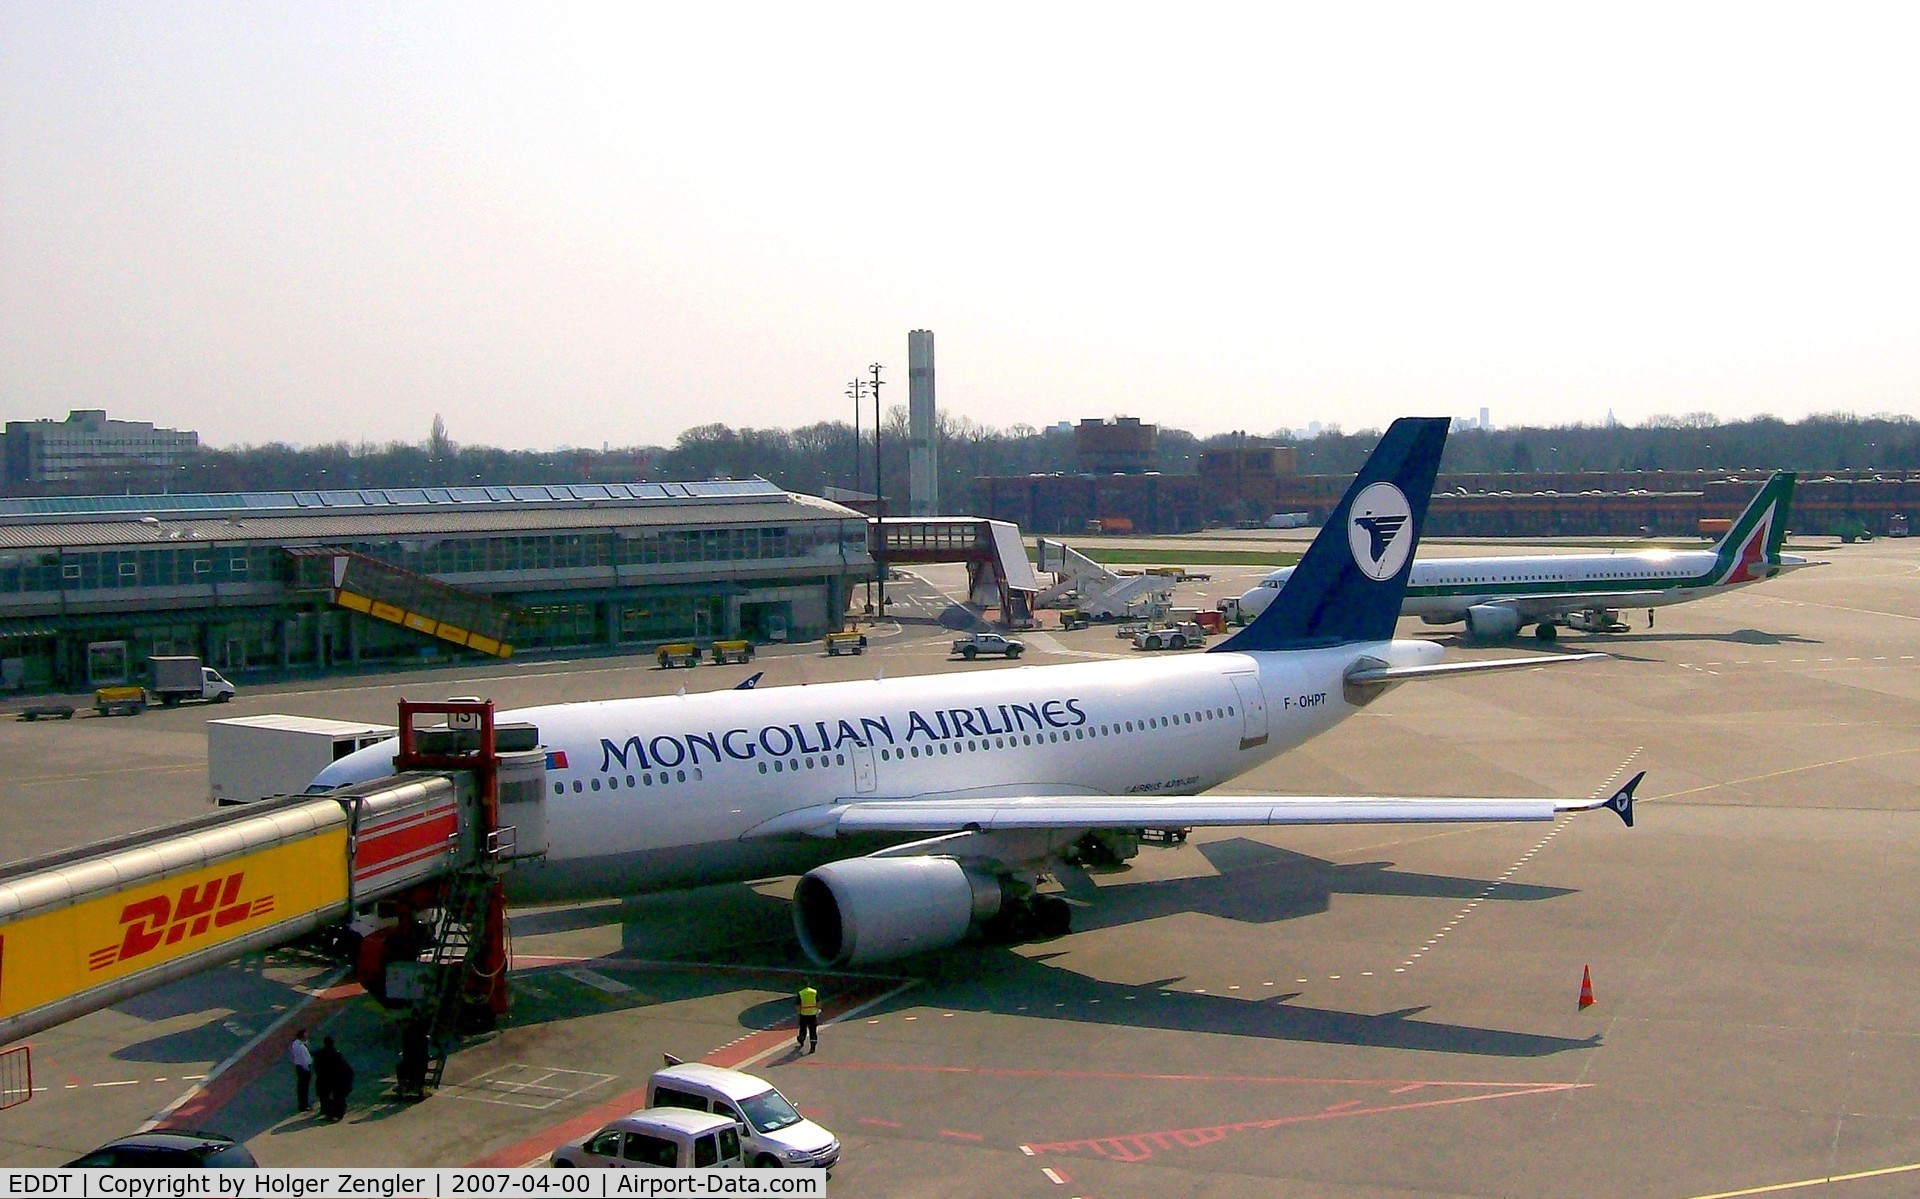 Tegel International Airport (closing in 2011), Berlin Germany (EDDT) - View over an italo-mongolian meeting at the western gates of TXL